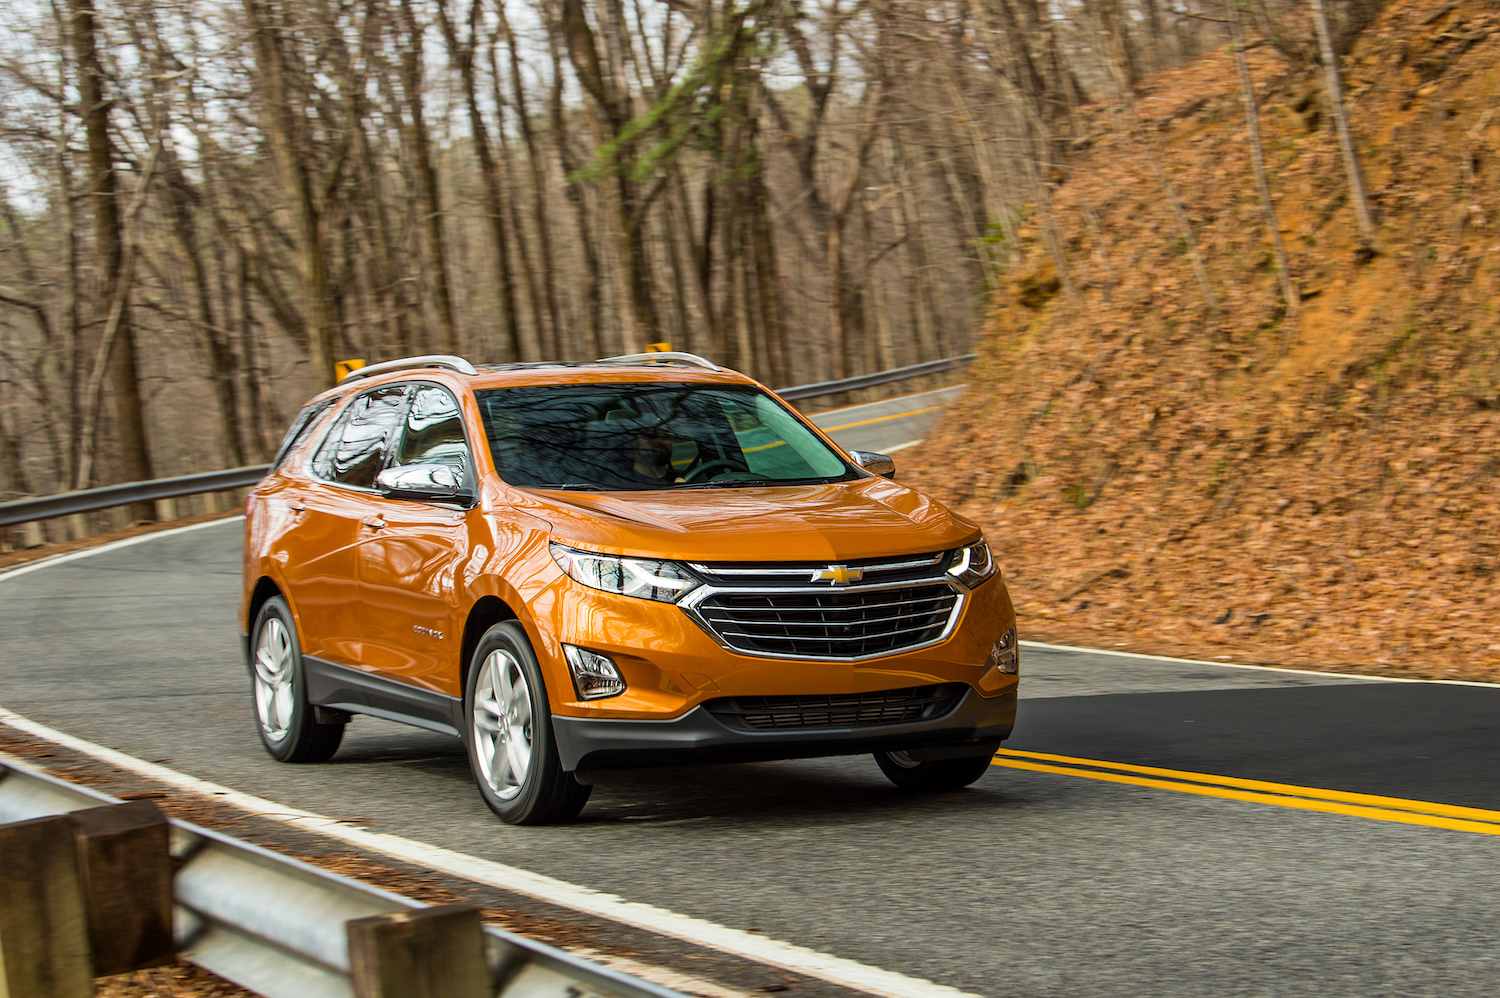 Orange Chevrolet Equinox crossover SUV driving around a curve in a rural road, trees and orange leaves visible in the background.